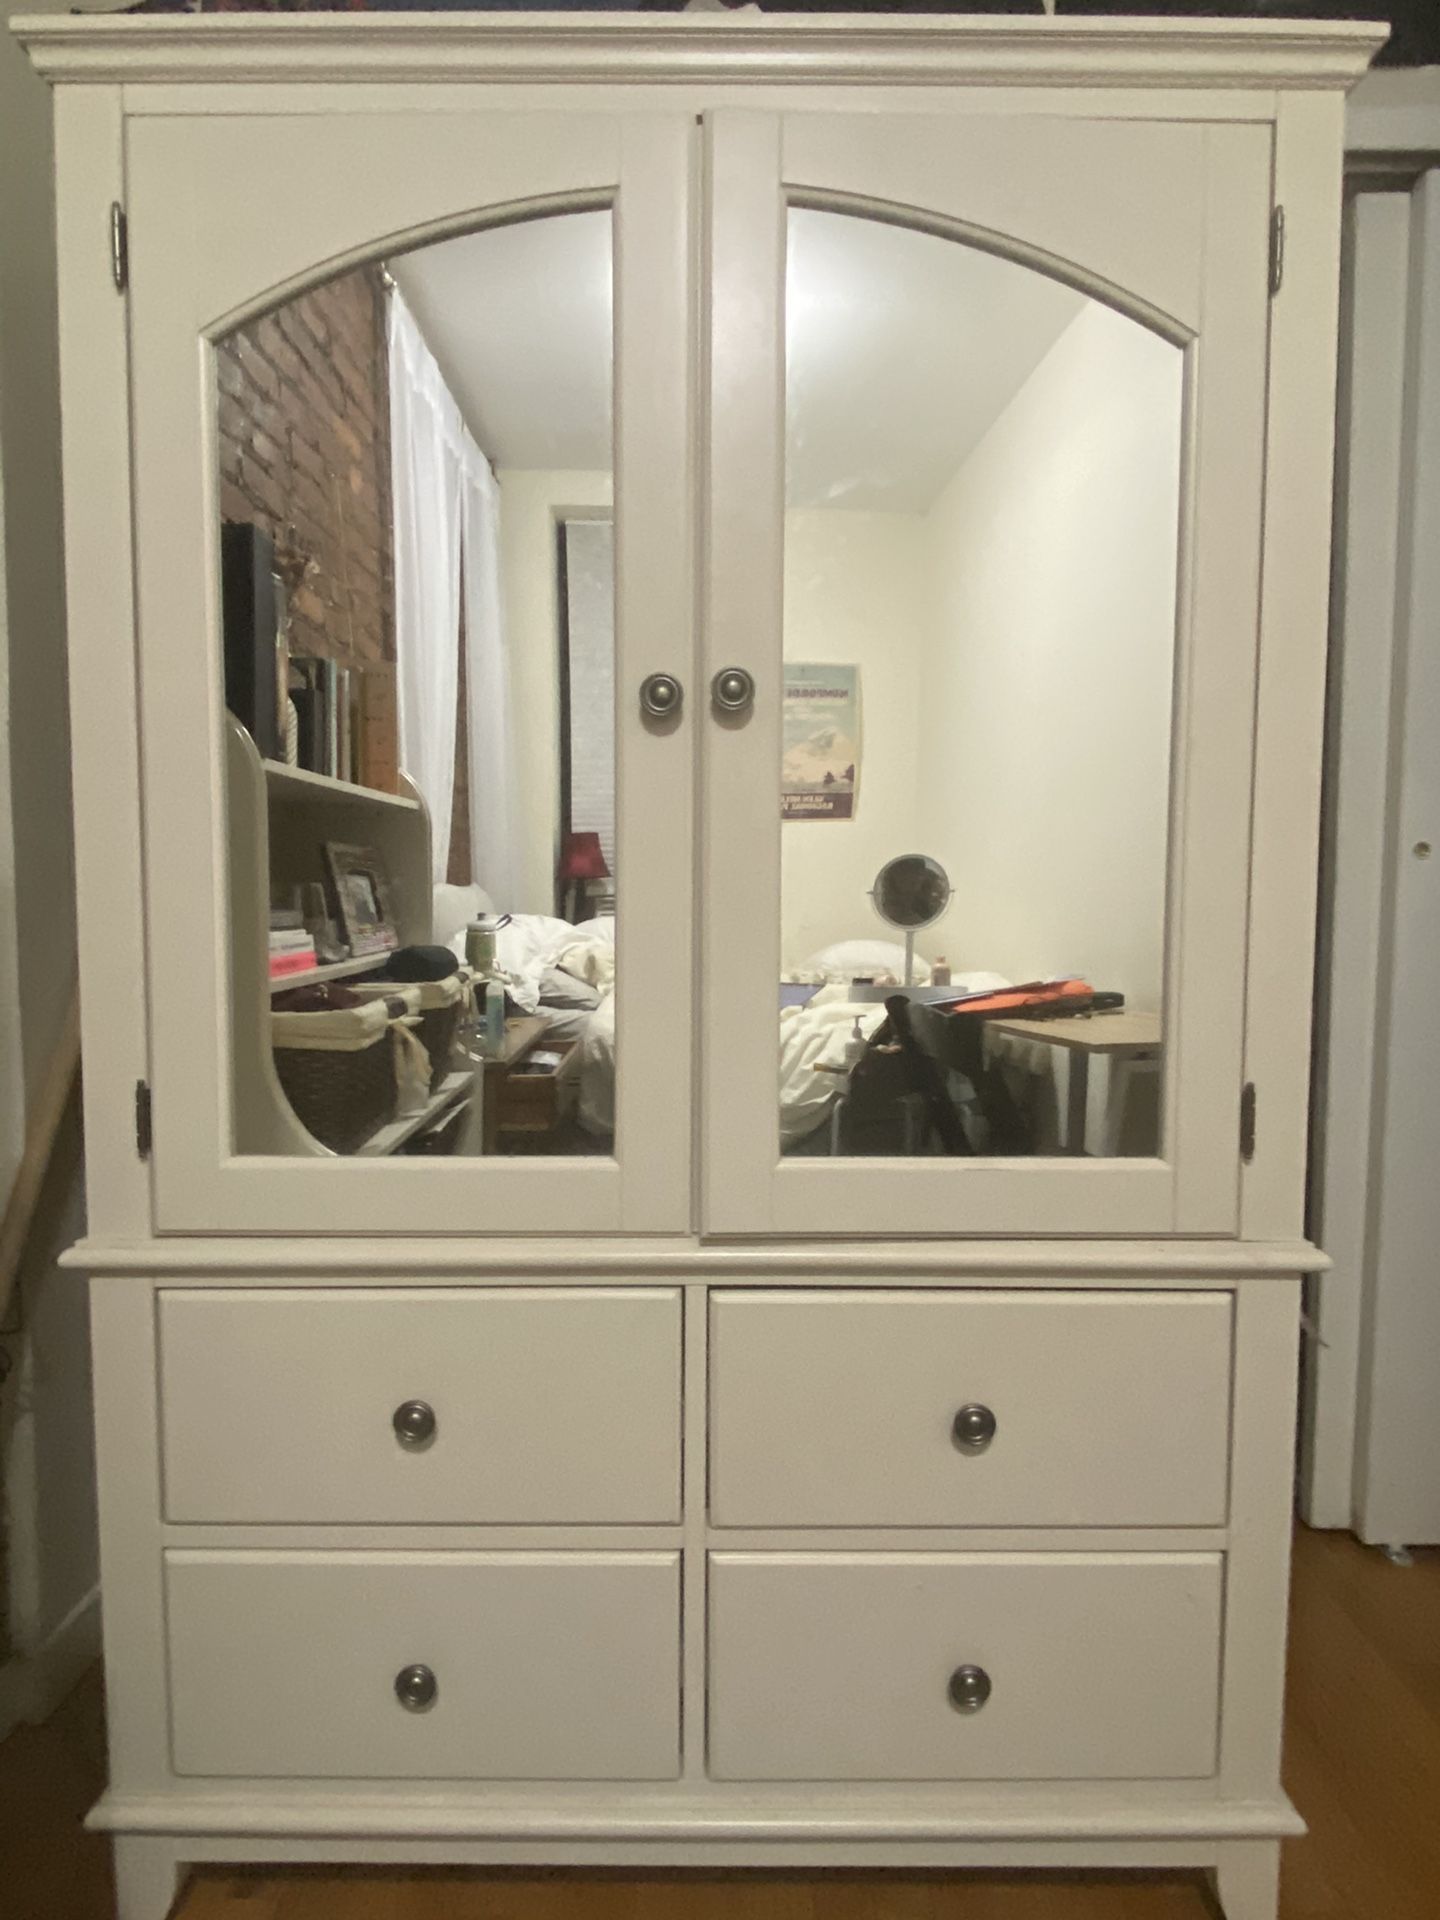 Raymour & Flanigan Mirrored Armoire & Bookcase Bedroom Set